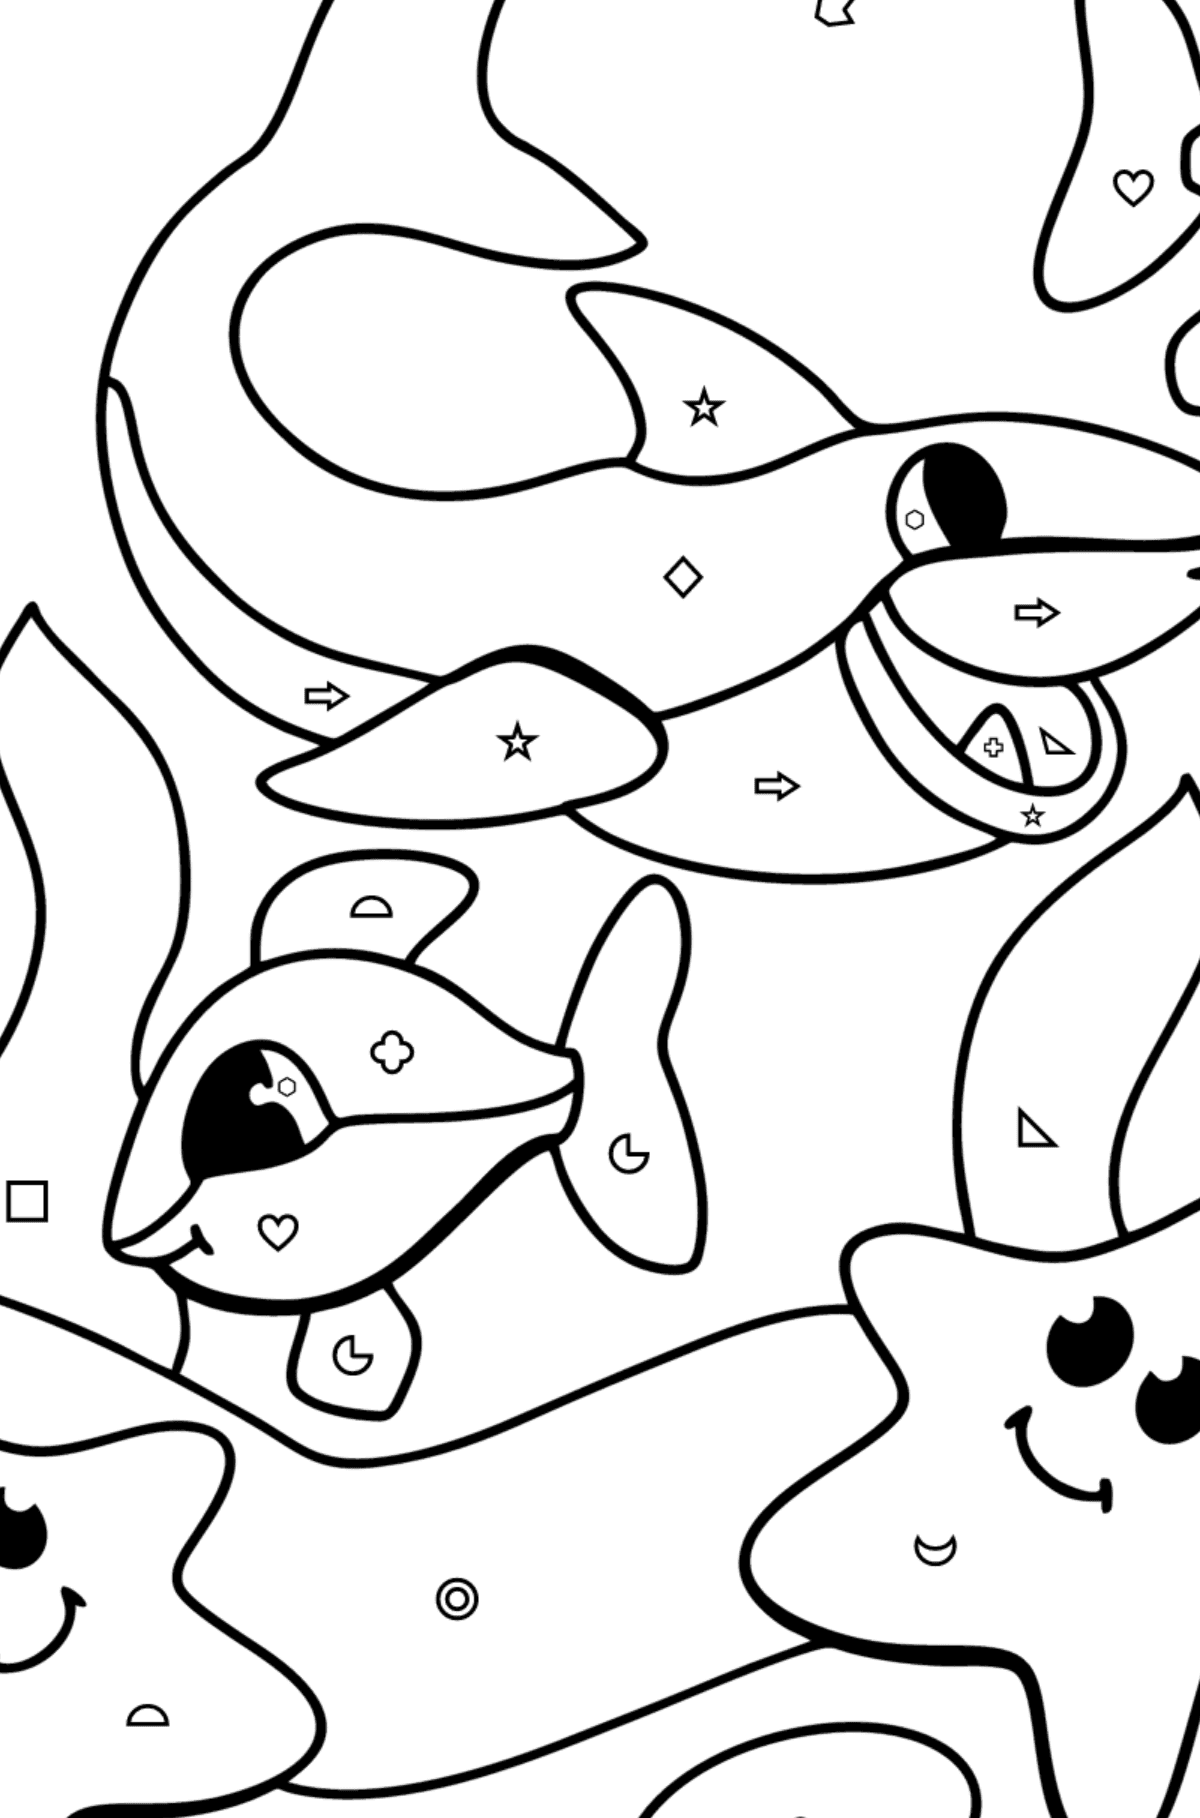 Cute shark coloring page - Coloring by Geometric Shapes for Kids